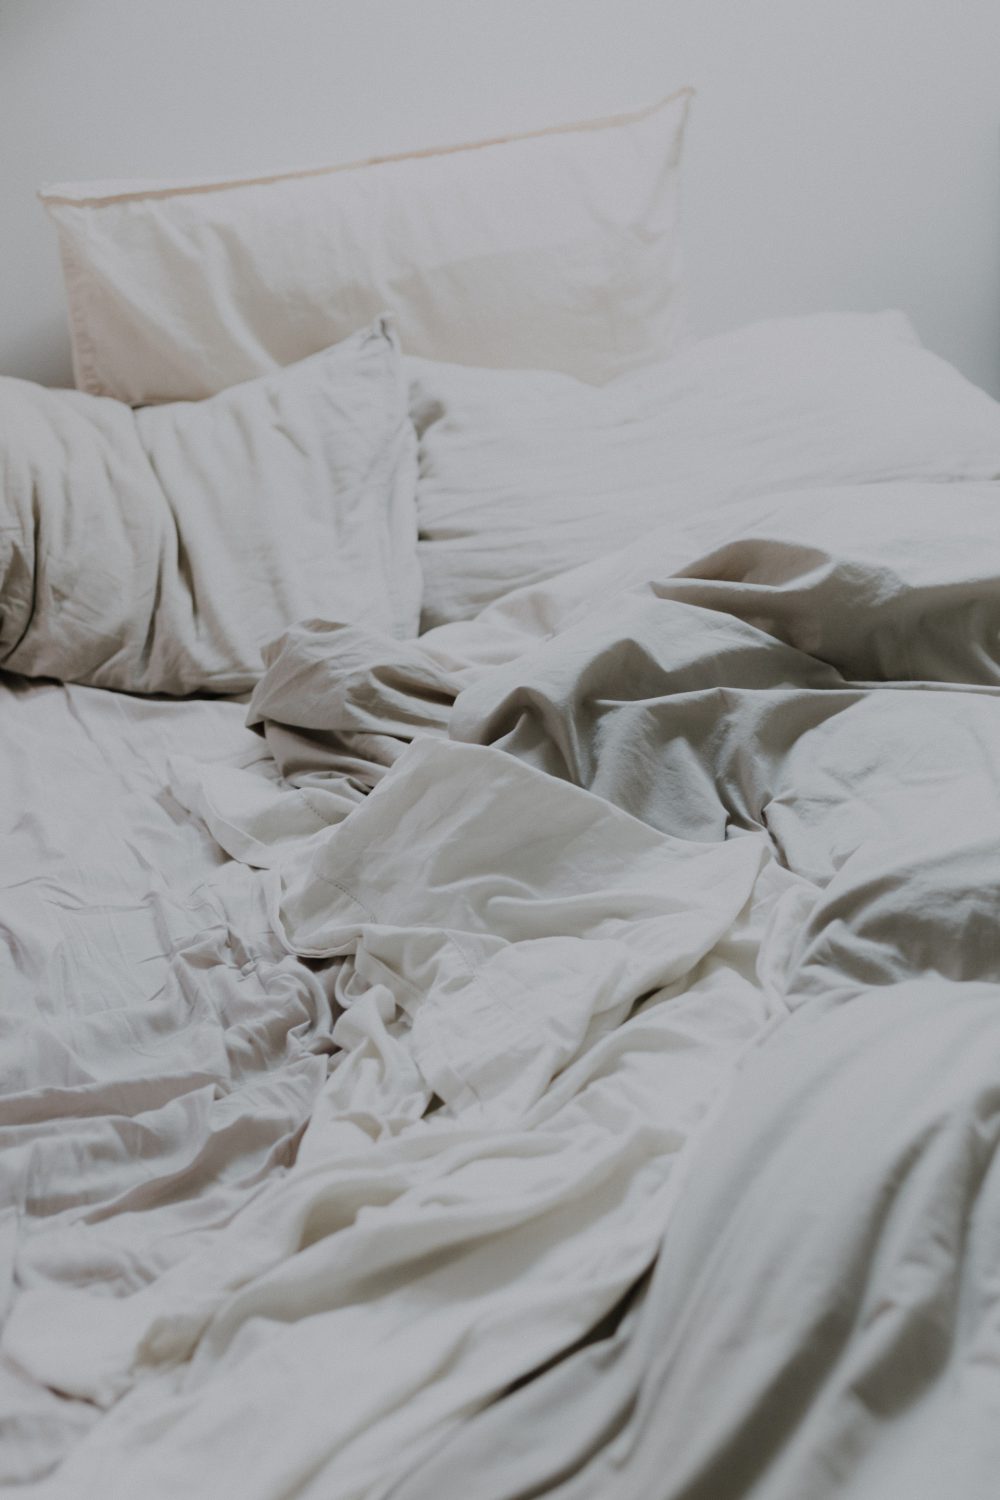 A scattered bed with white, rumpled sheets